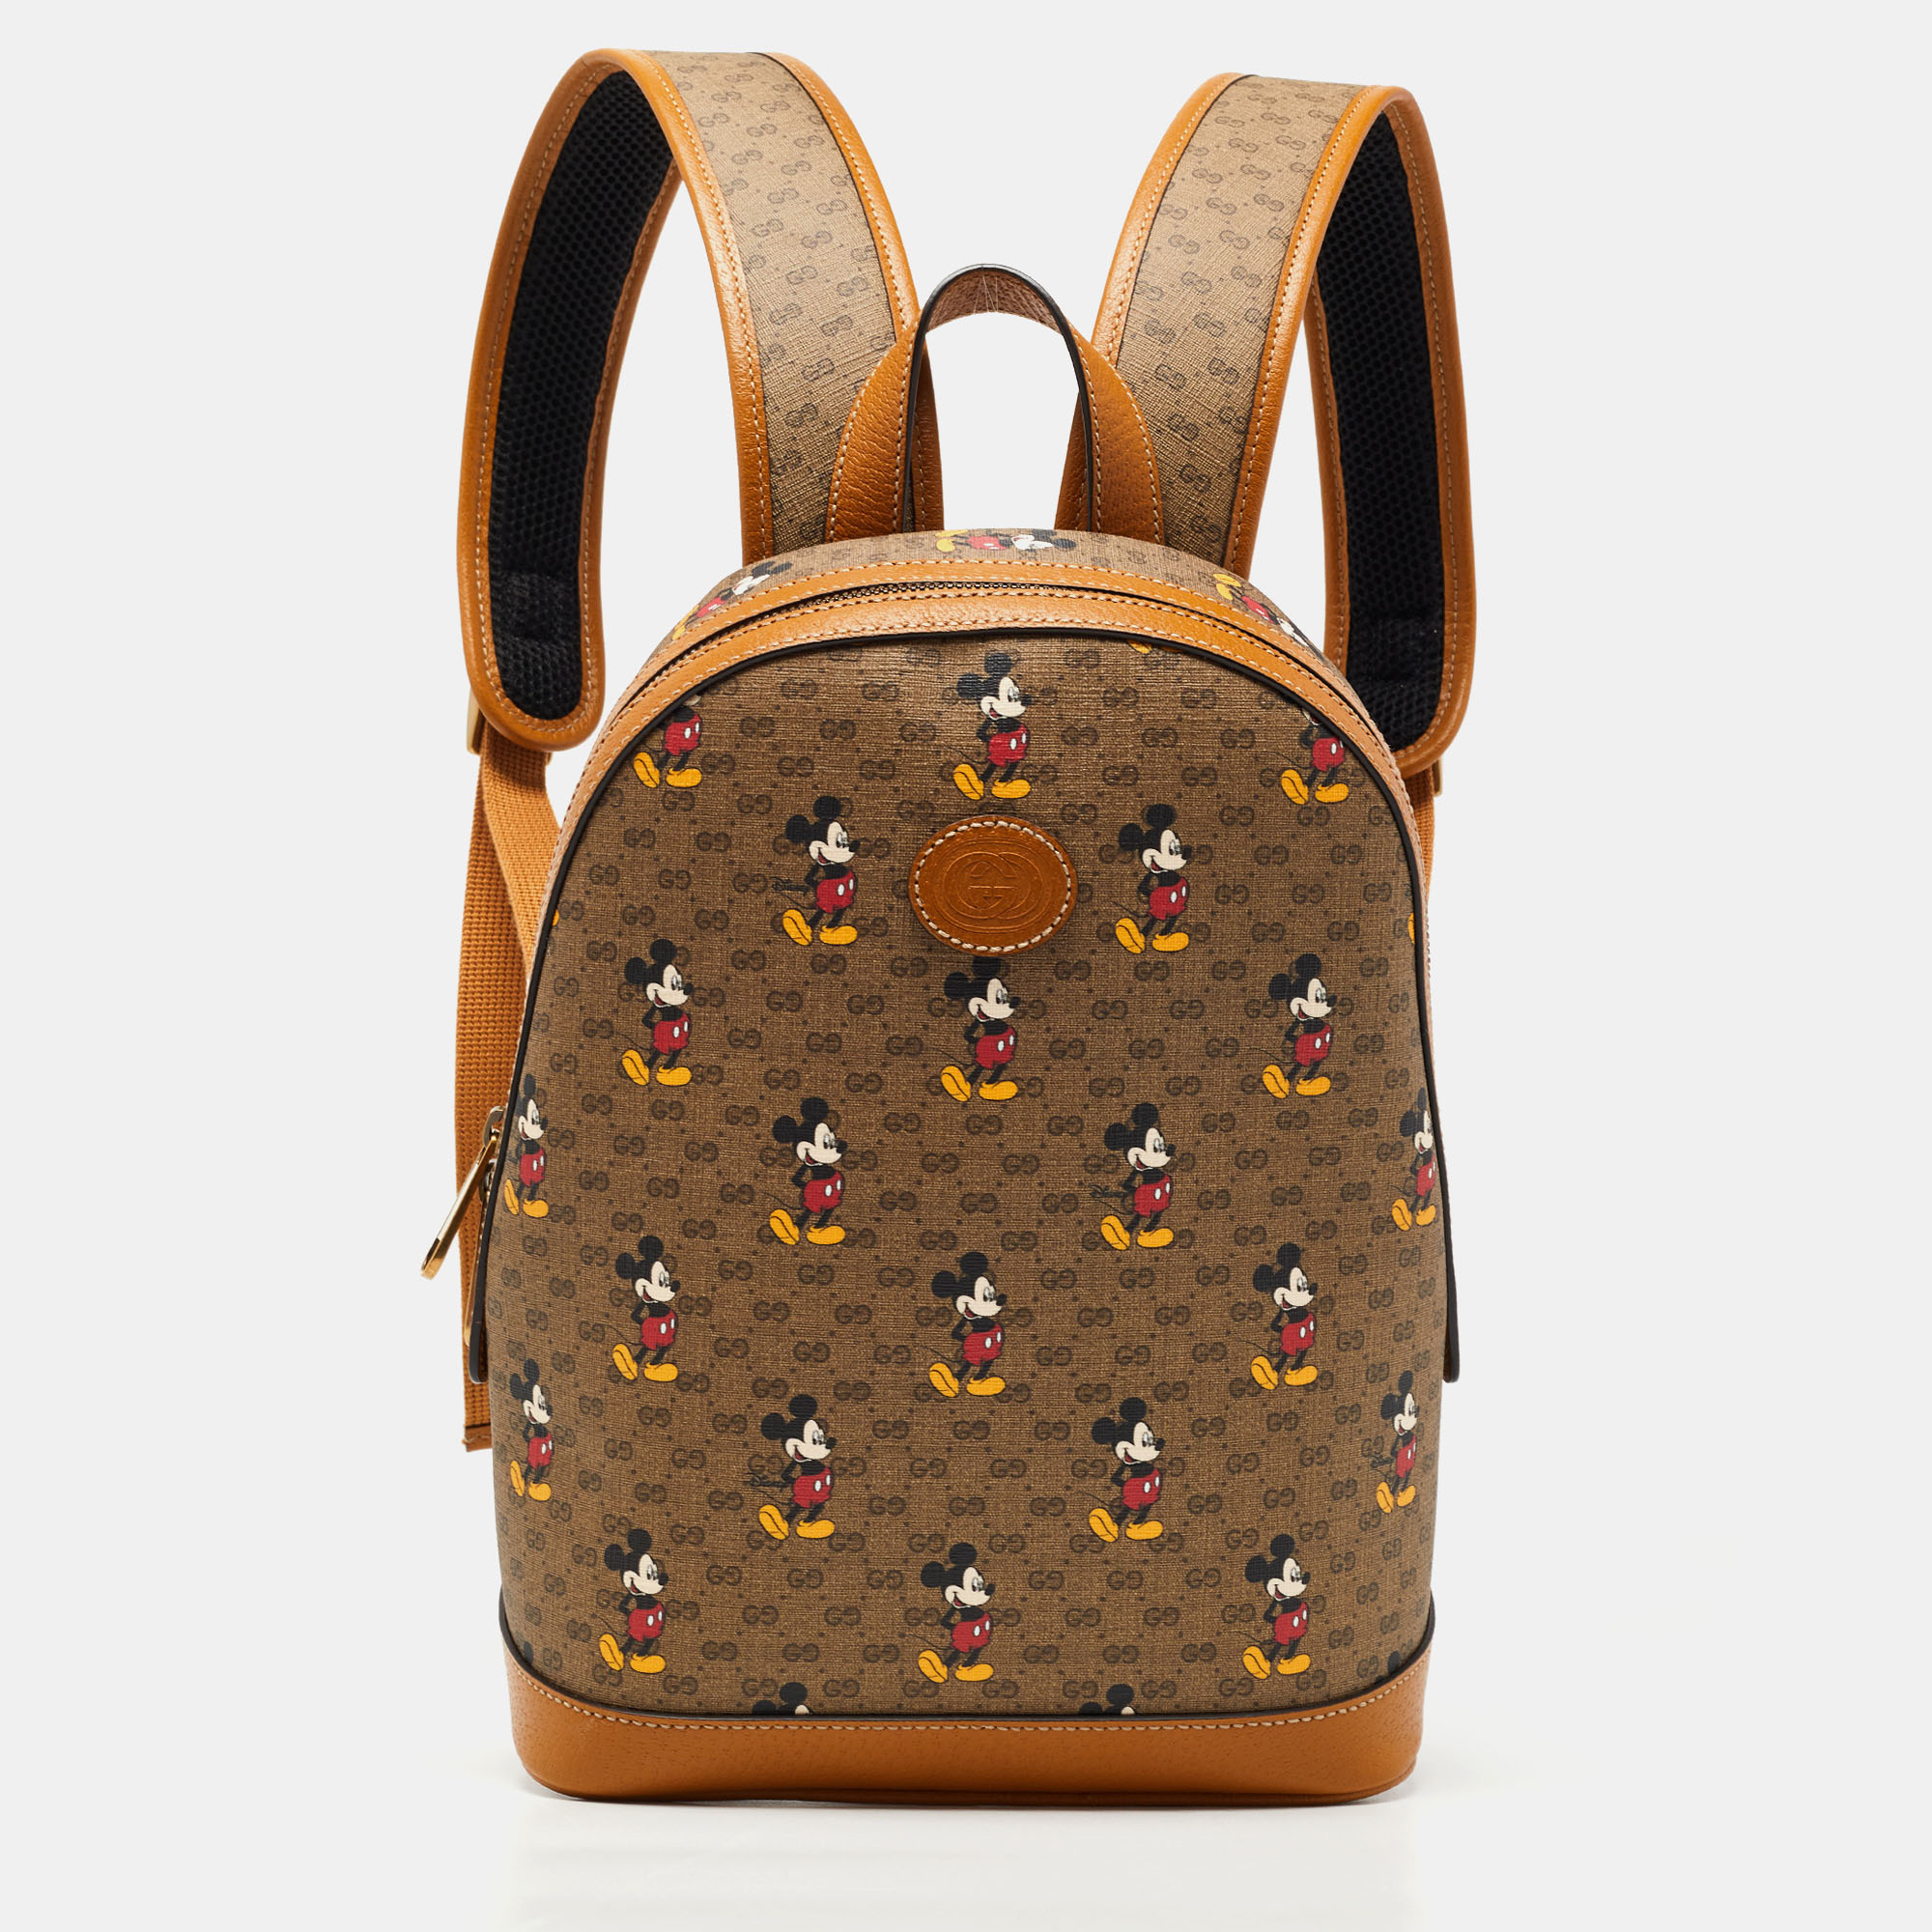 Pre-owned Gucci X Disney Tan/beige Mickey Print Gg Supreme Canvas Small Backpack